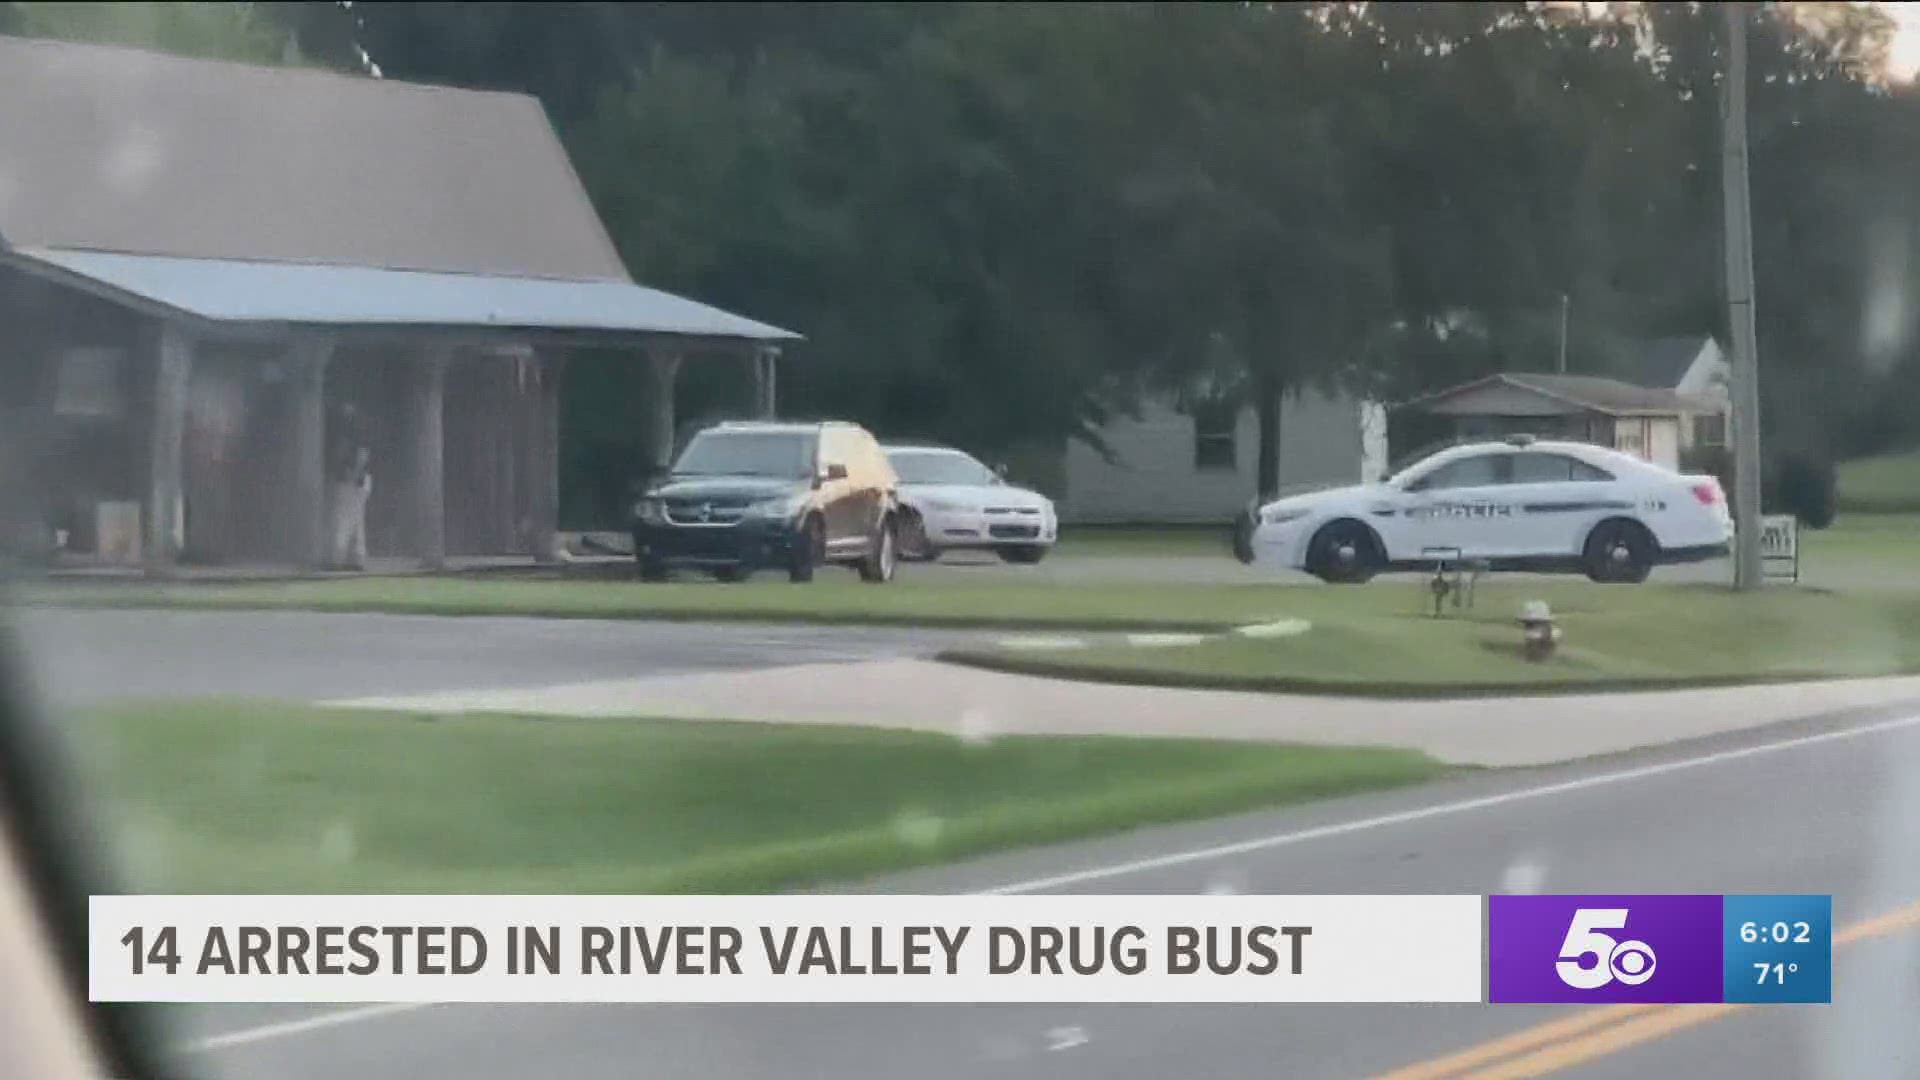 14 people were arrested Thursday in the River Valley as part of an investigation into methamphetamine trafficking. https://bit.ly/3maISag